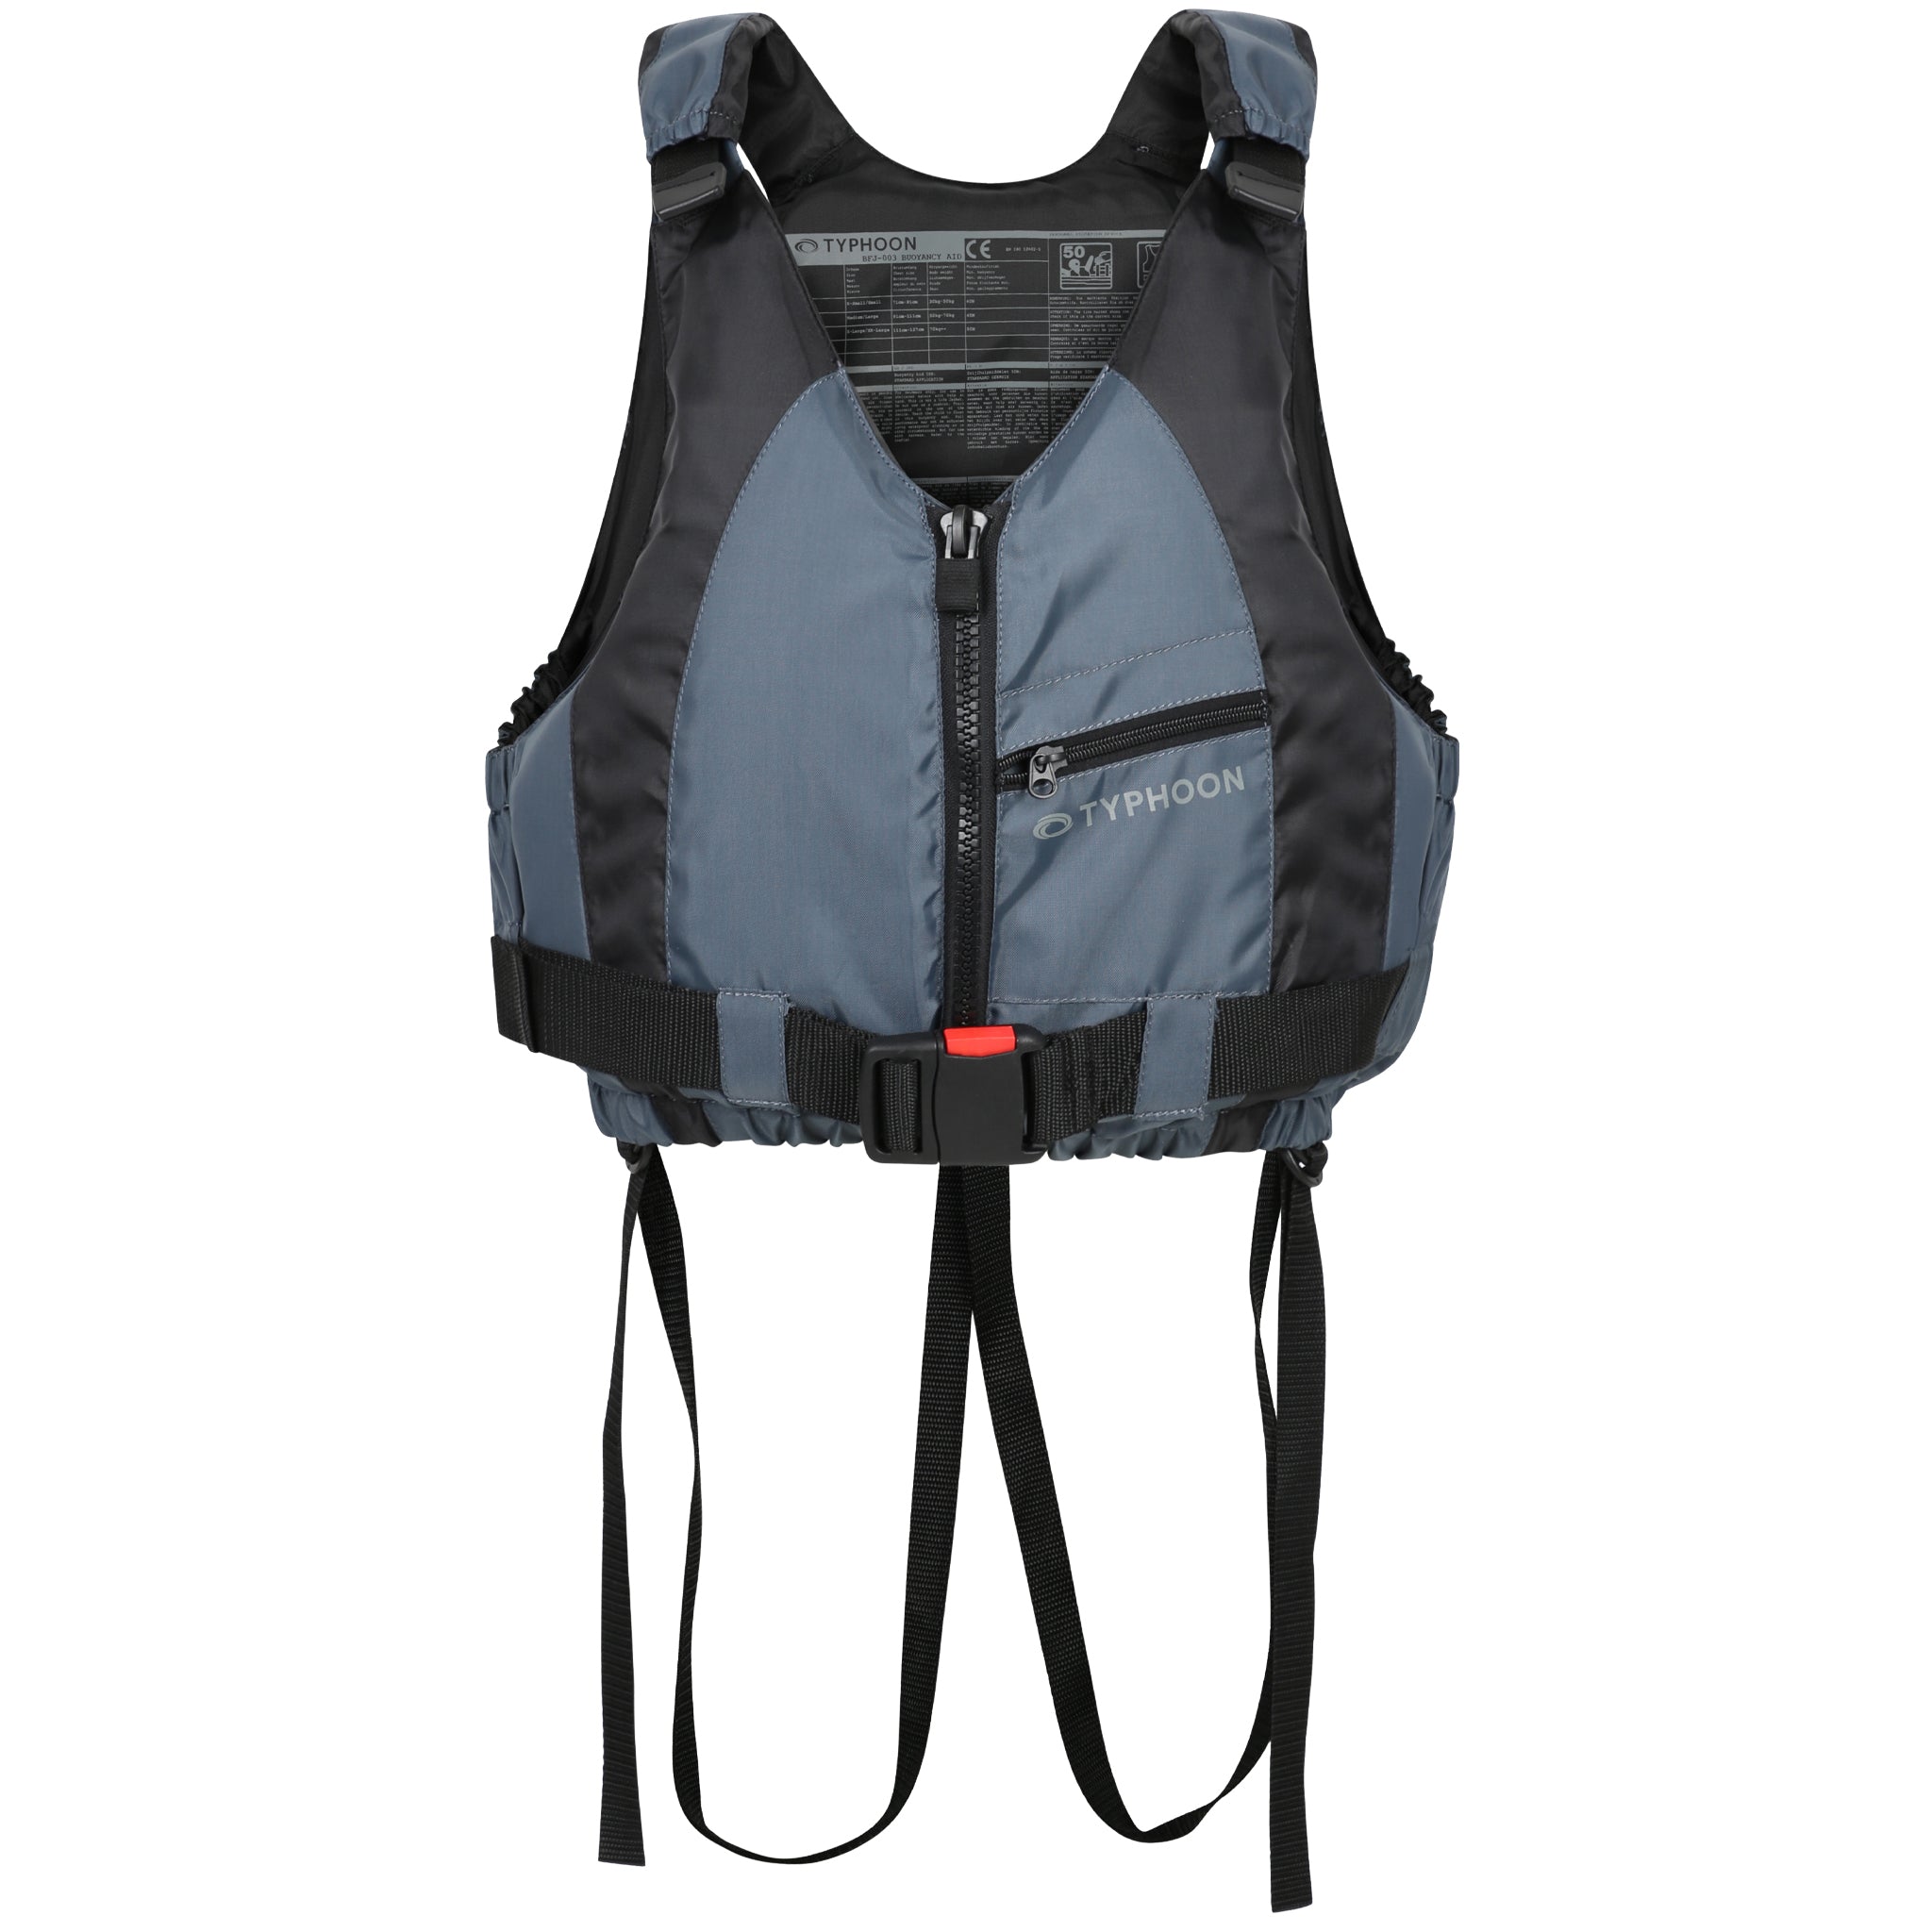 Typhoon Amrok 50N Buoyancy Aid | Graphite/Black - Front showing Crotch Straps